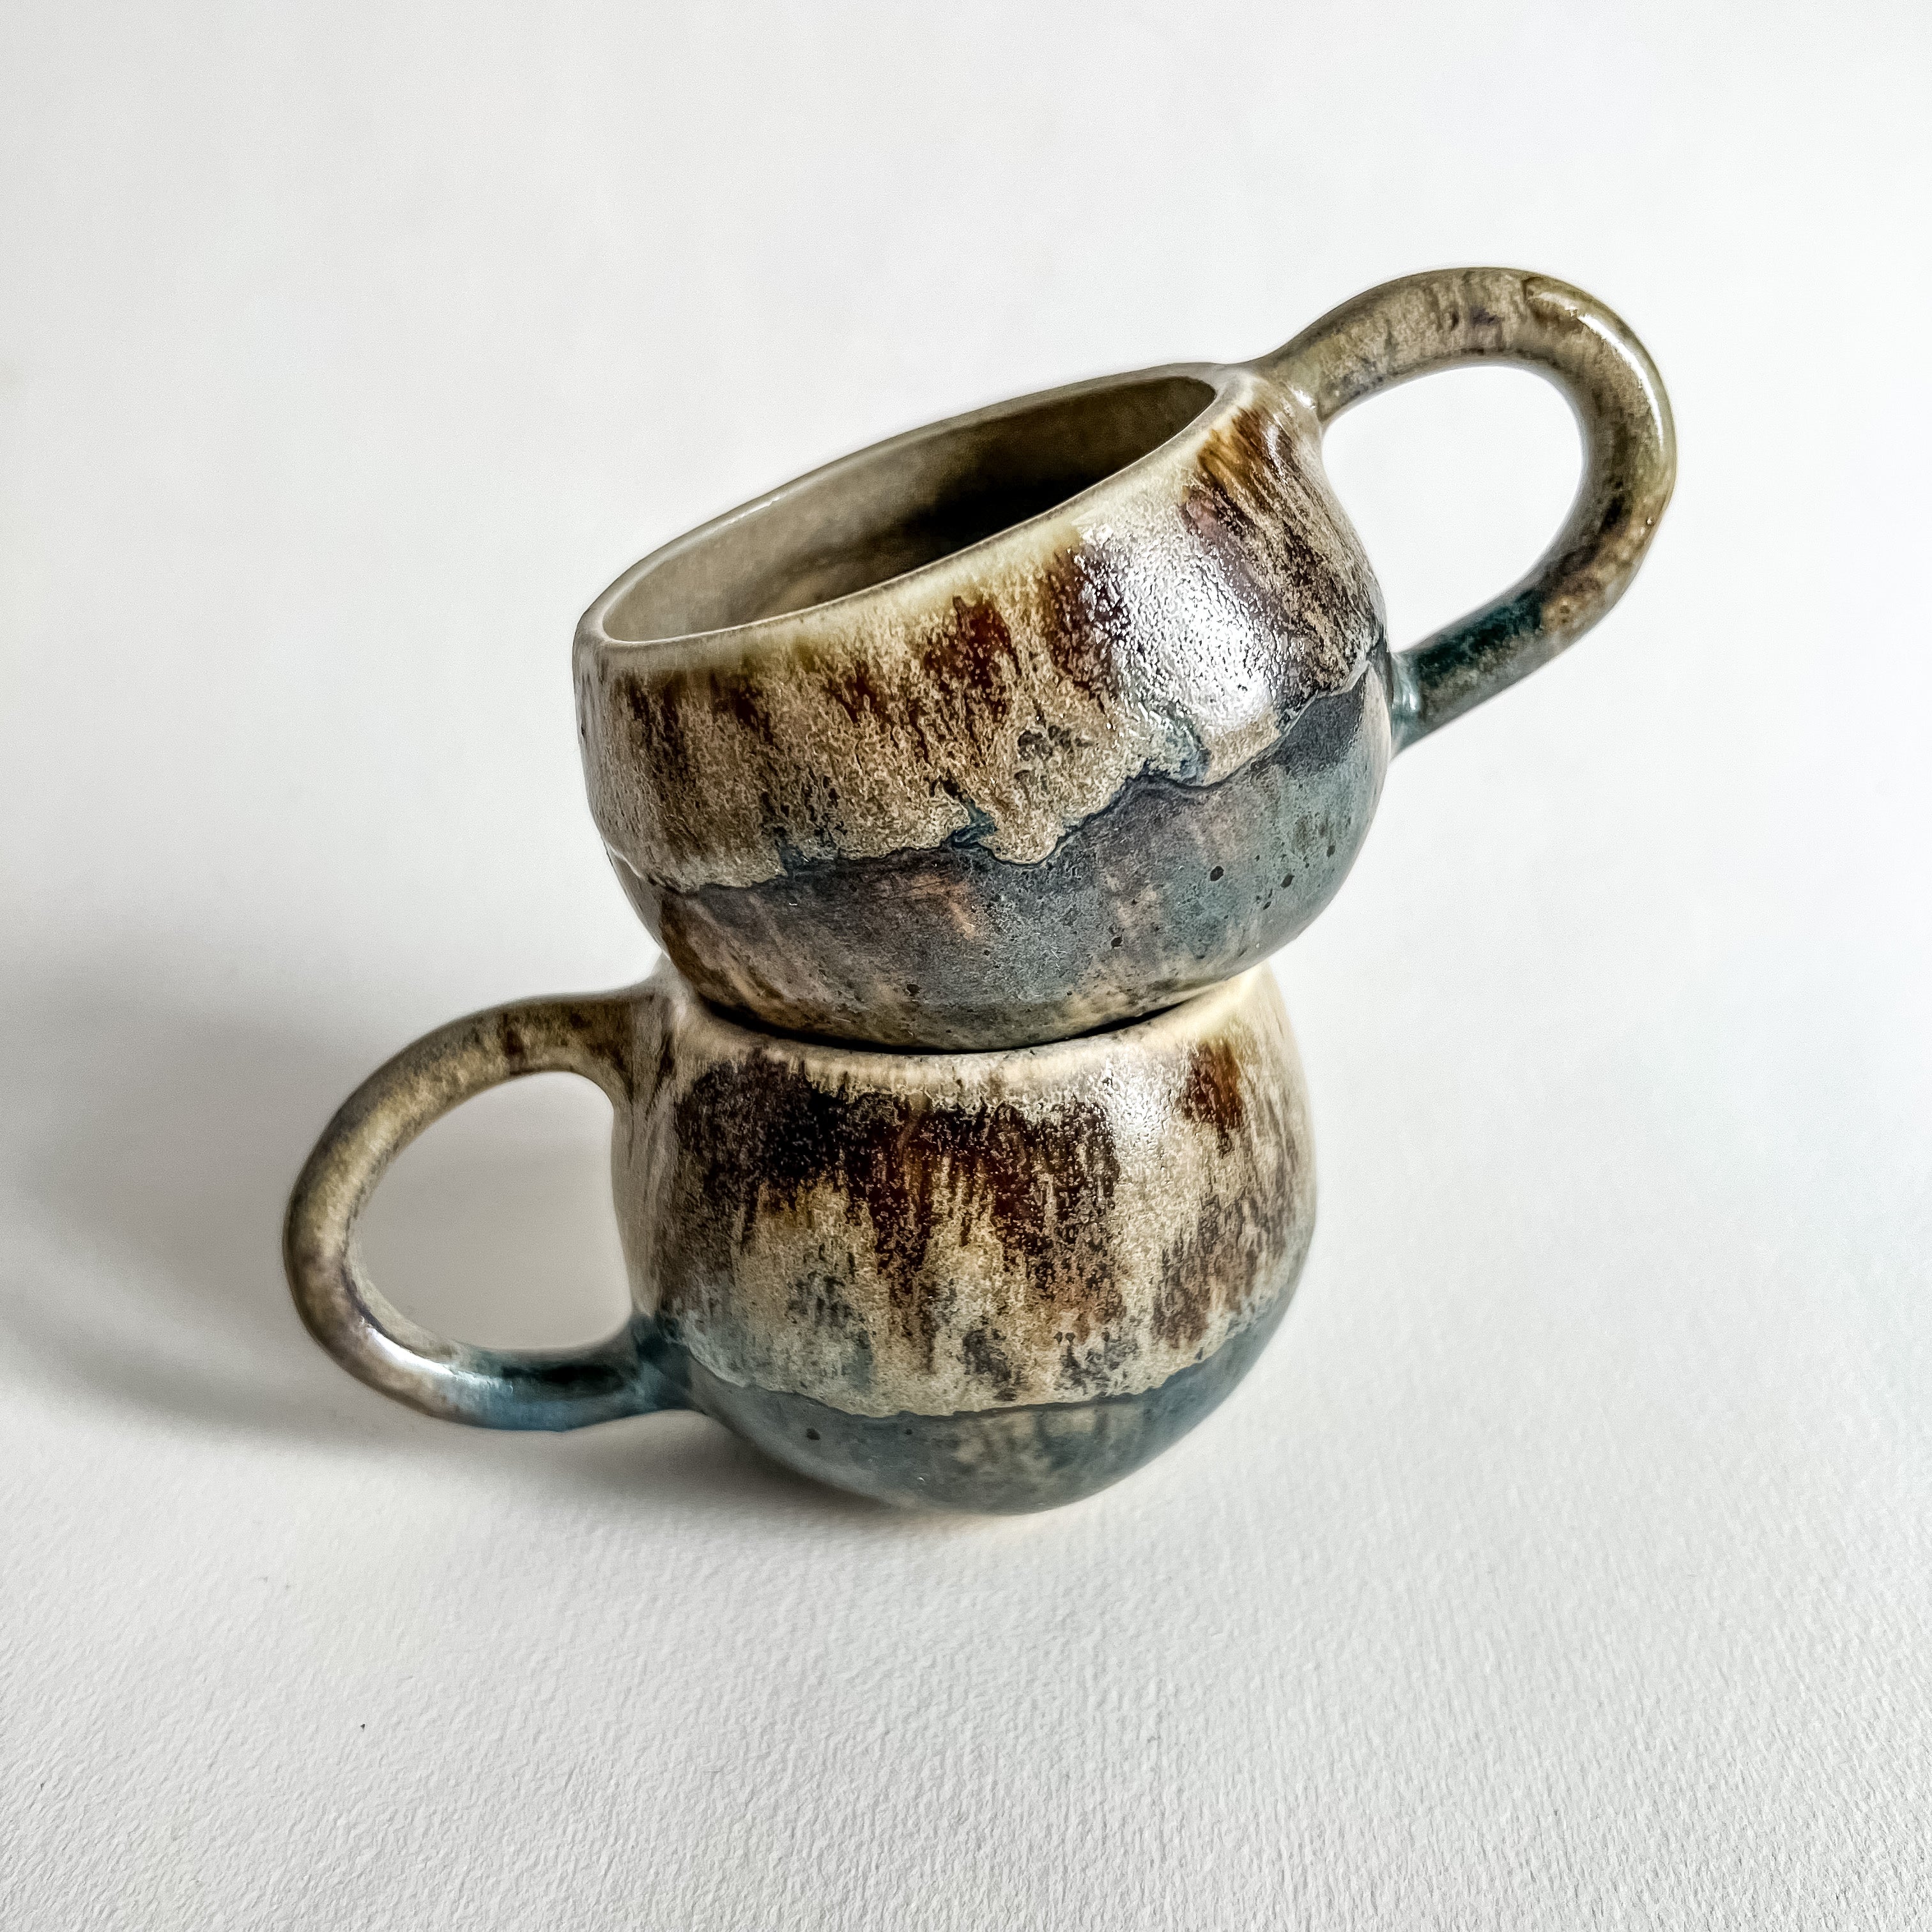 Handmade cups from Mexico